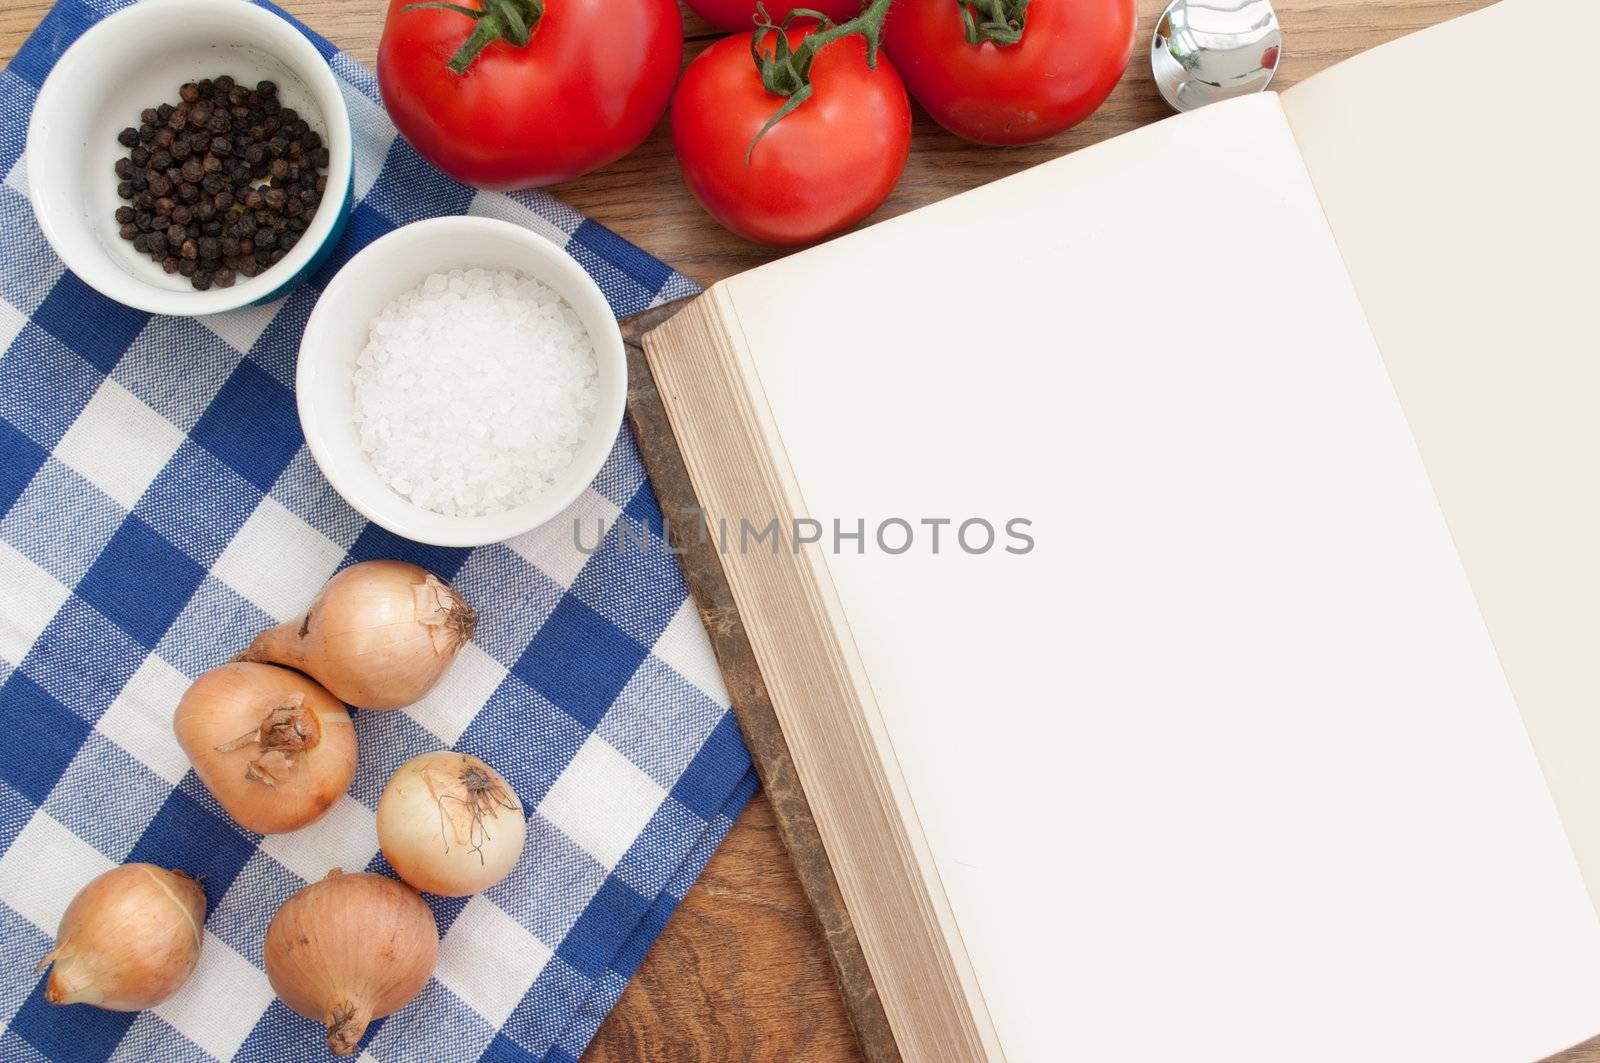 Open blank recipe book surrounded with ingredients 